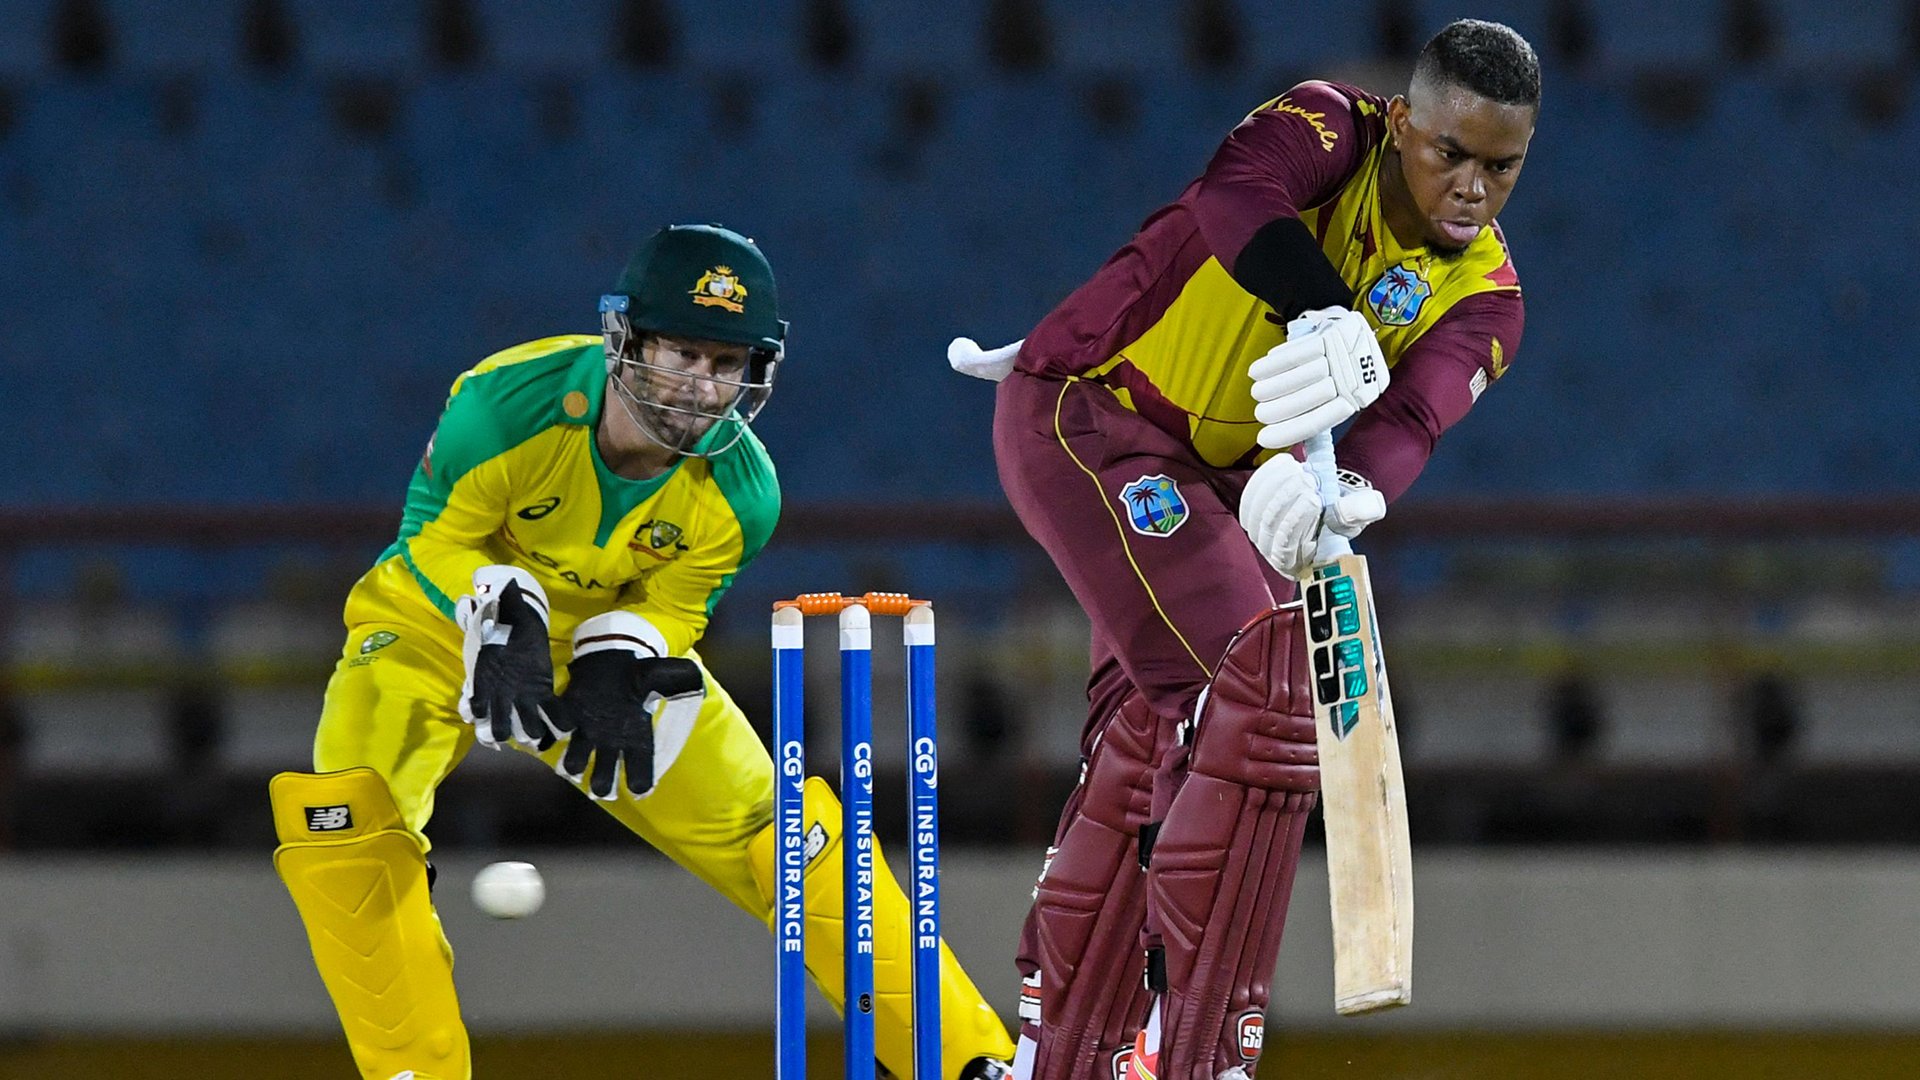 Bravo smashed one-handed six during WI vs AUS 2nd T20I